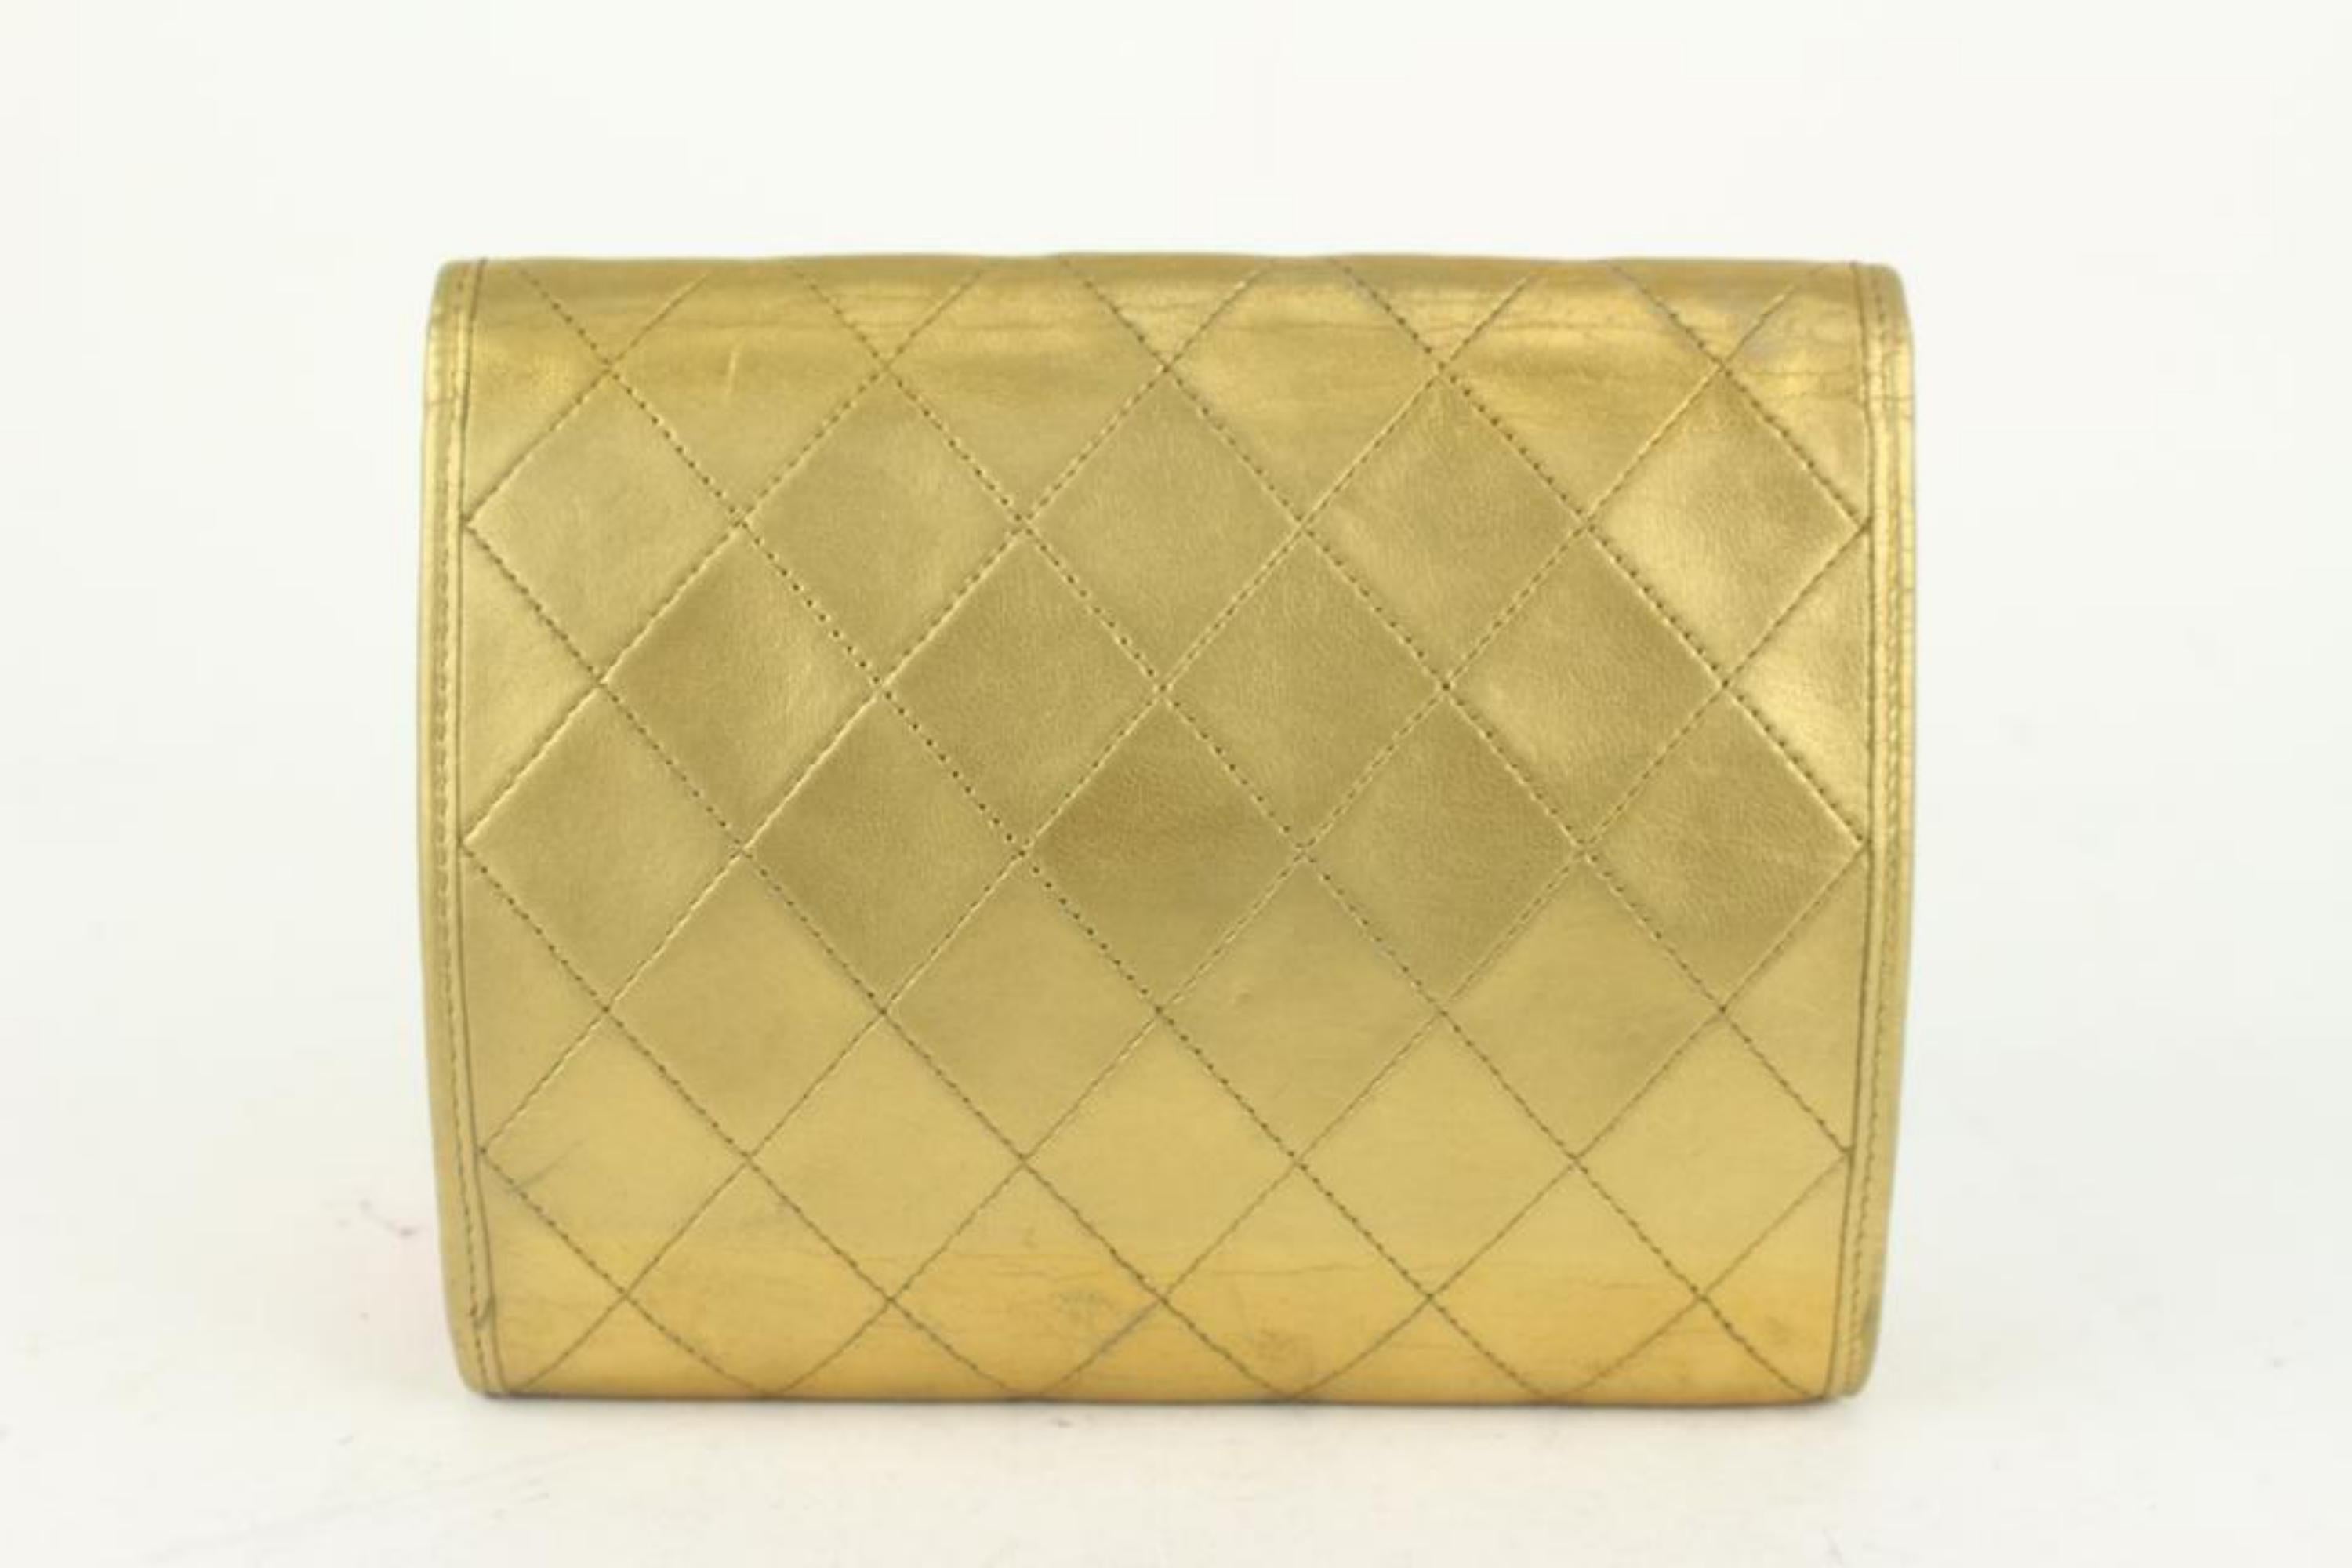 Chanel Quilted Mini Gold Classic Flap Pouch Chain Bag 1111c28 For Sale 7